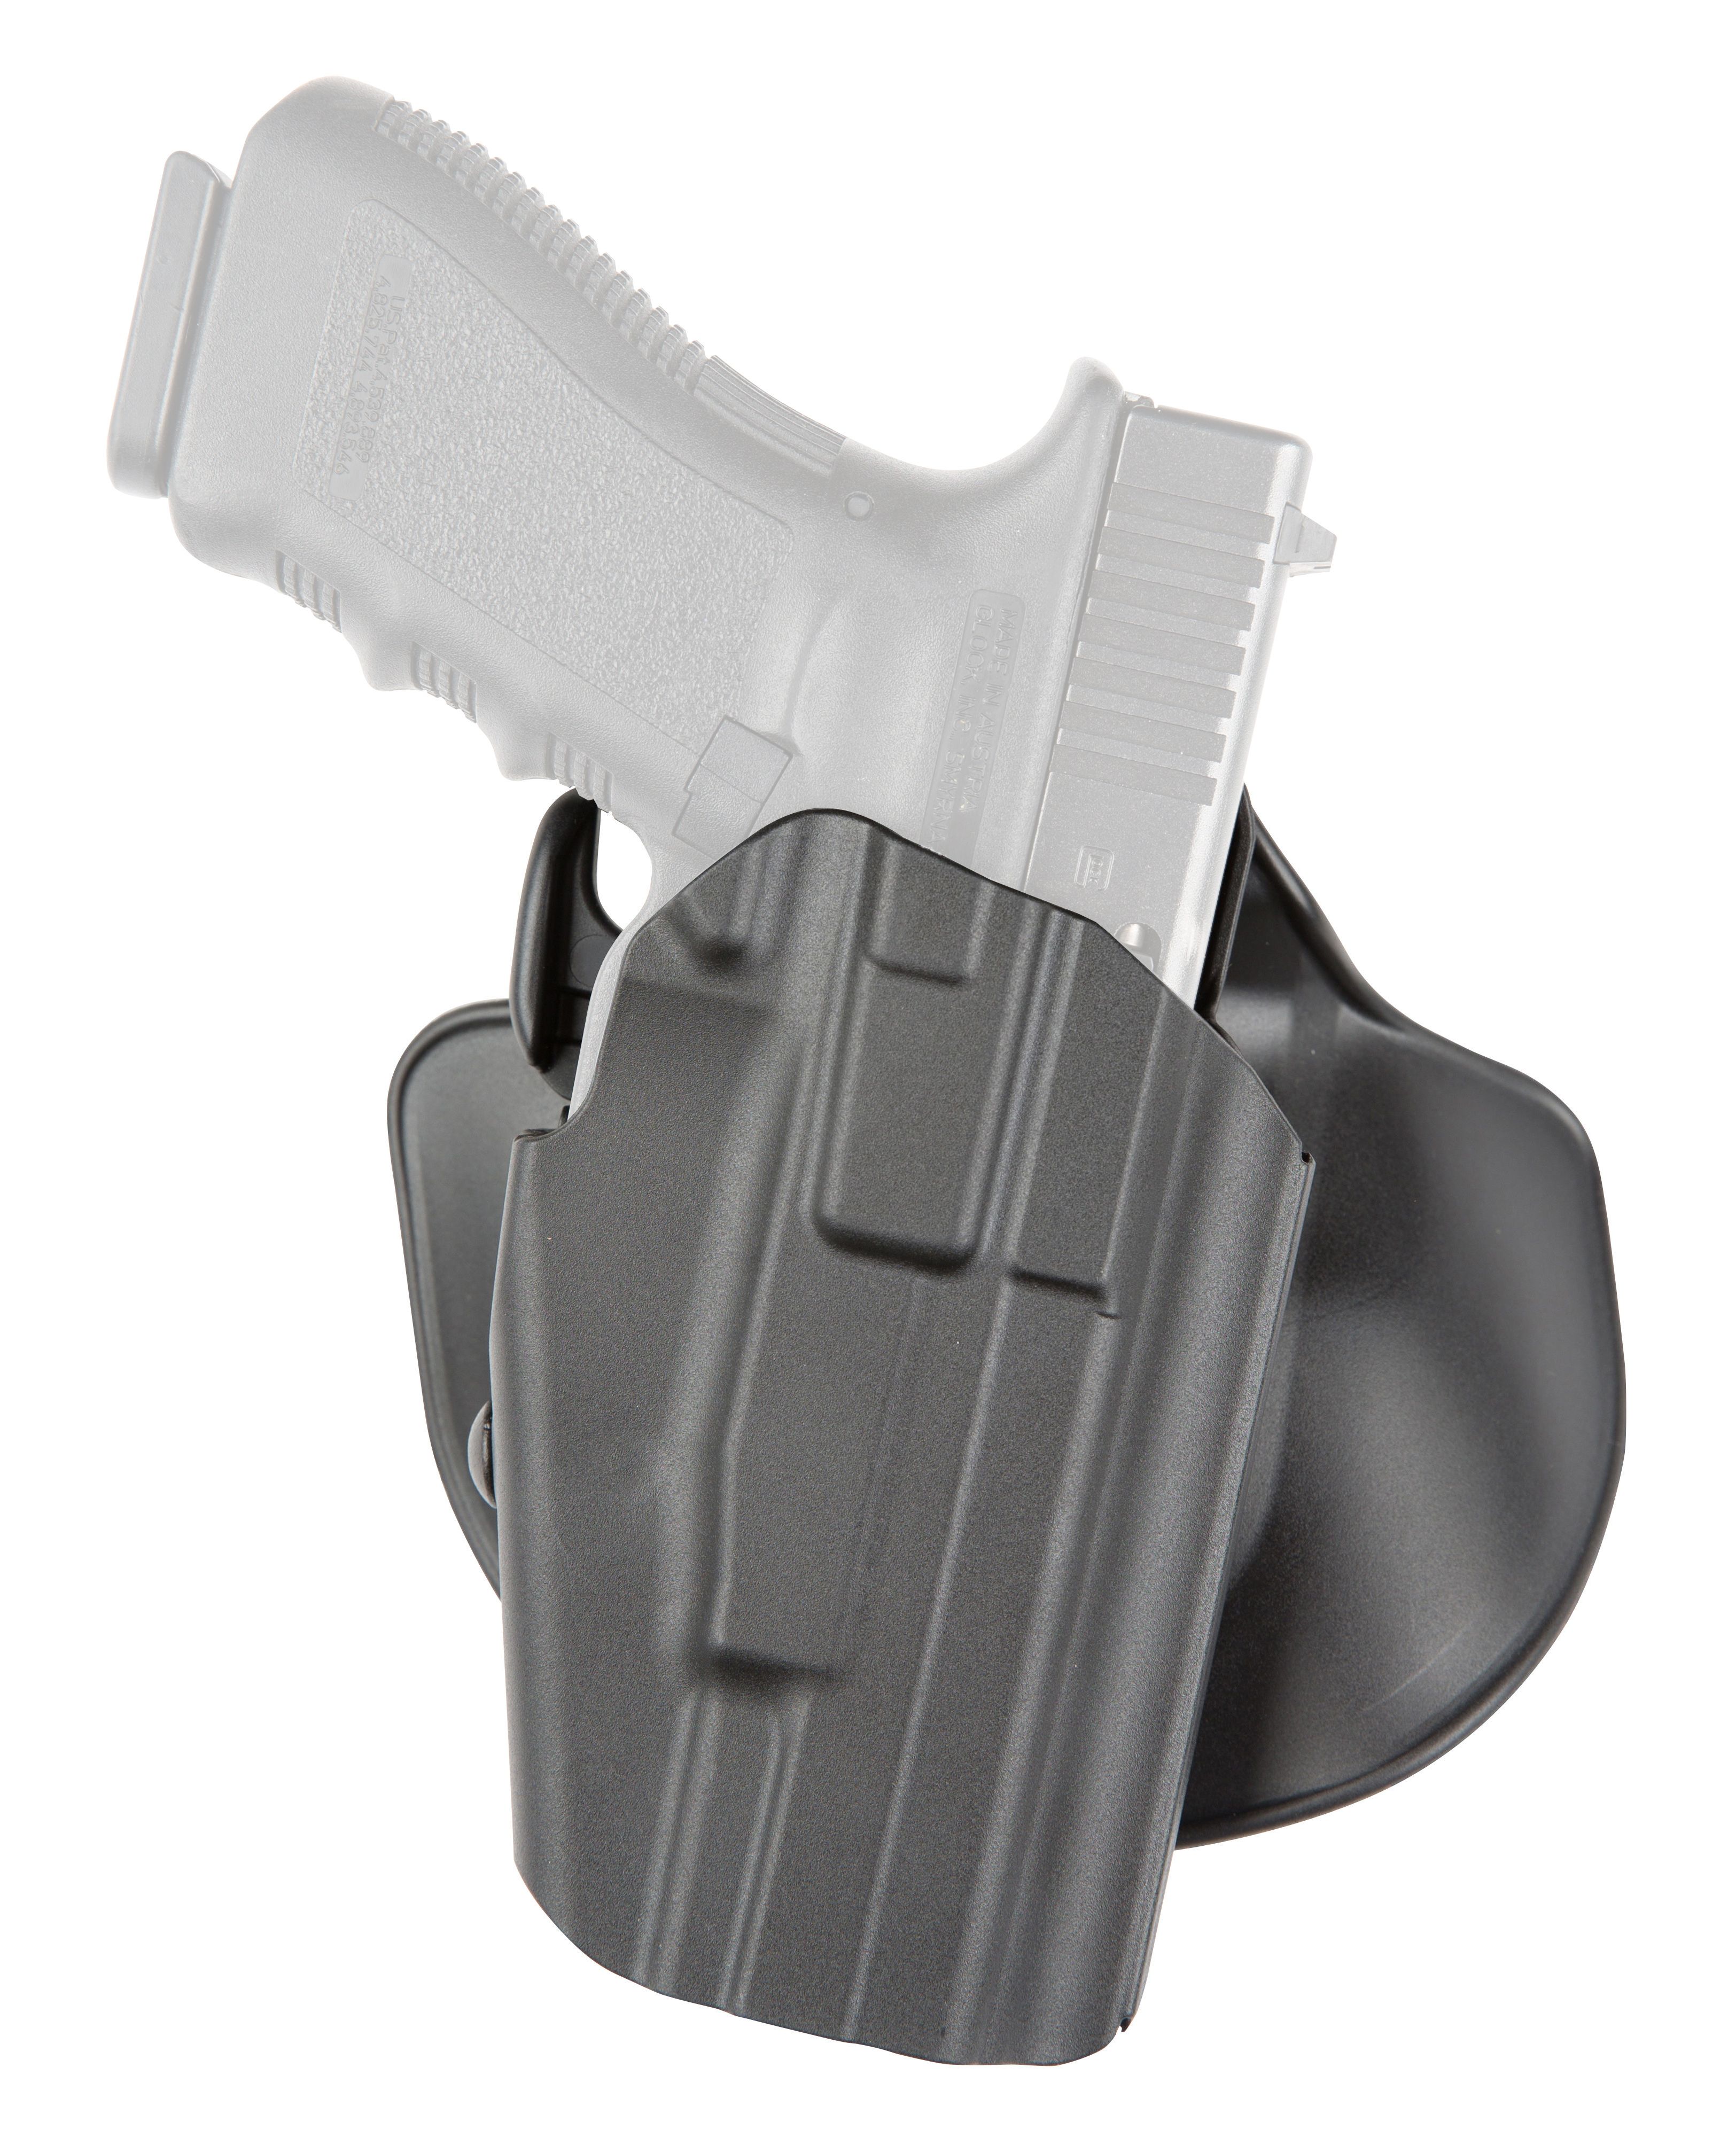 Safariland #578 7Ts Pro-Fit GLS Holster Size 3 Sub-Compact : 578-183-411